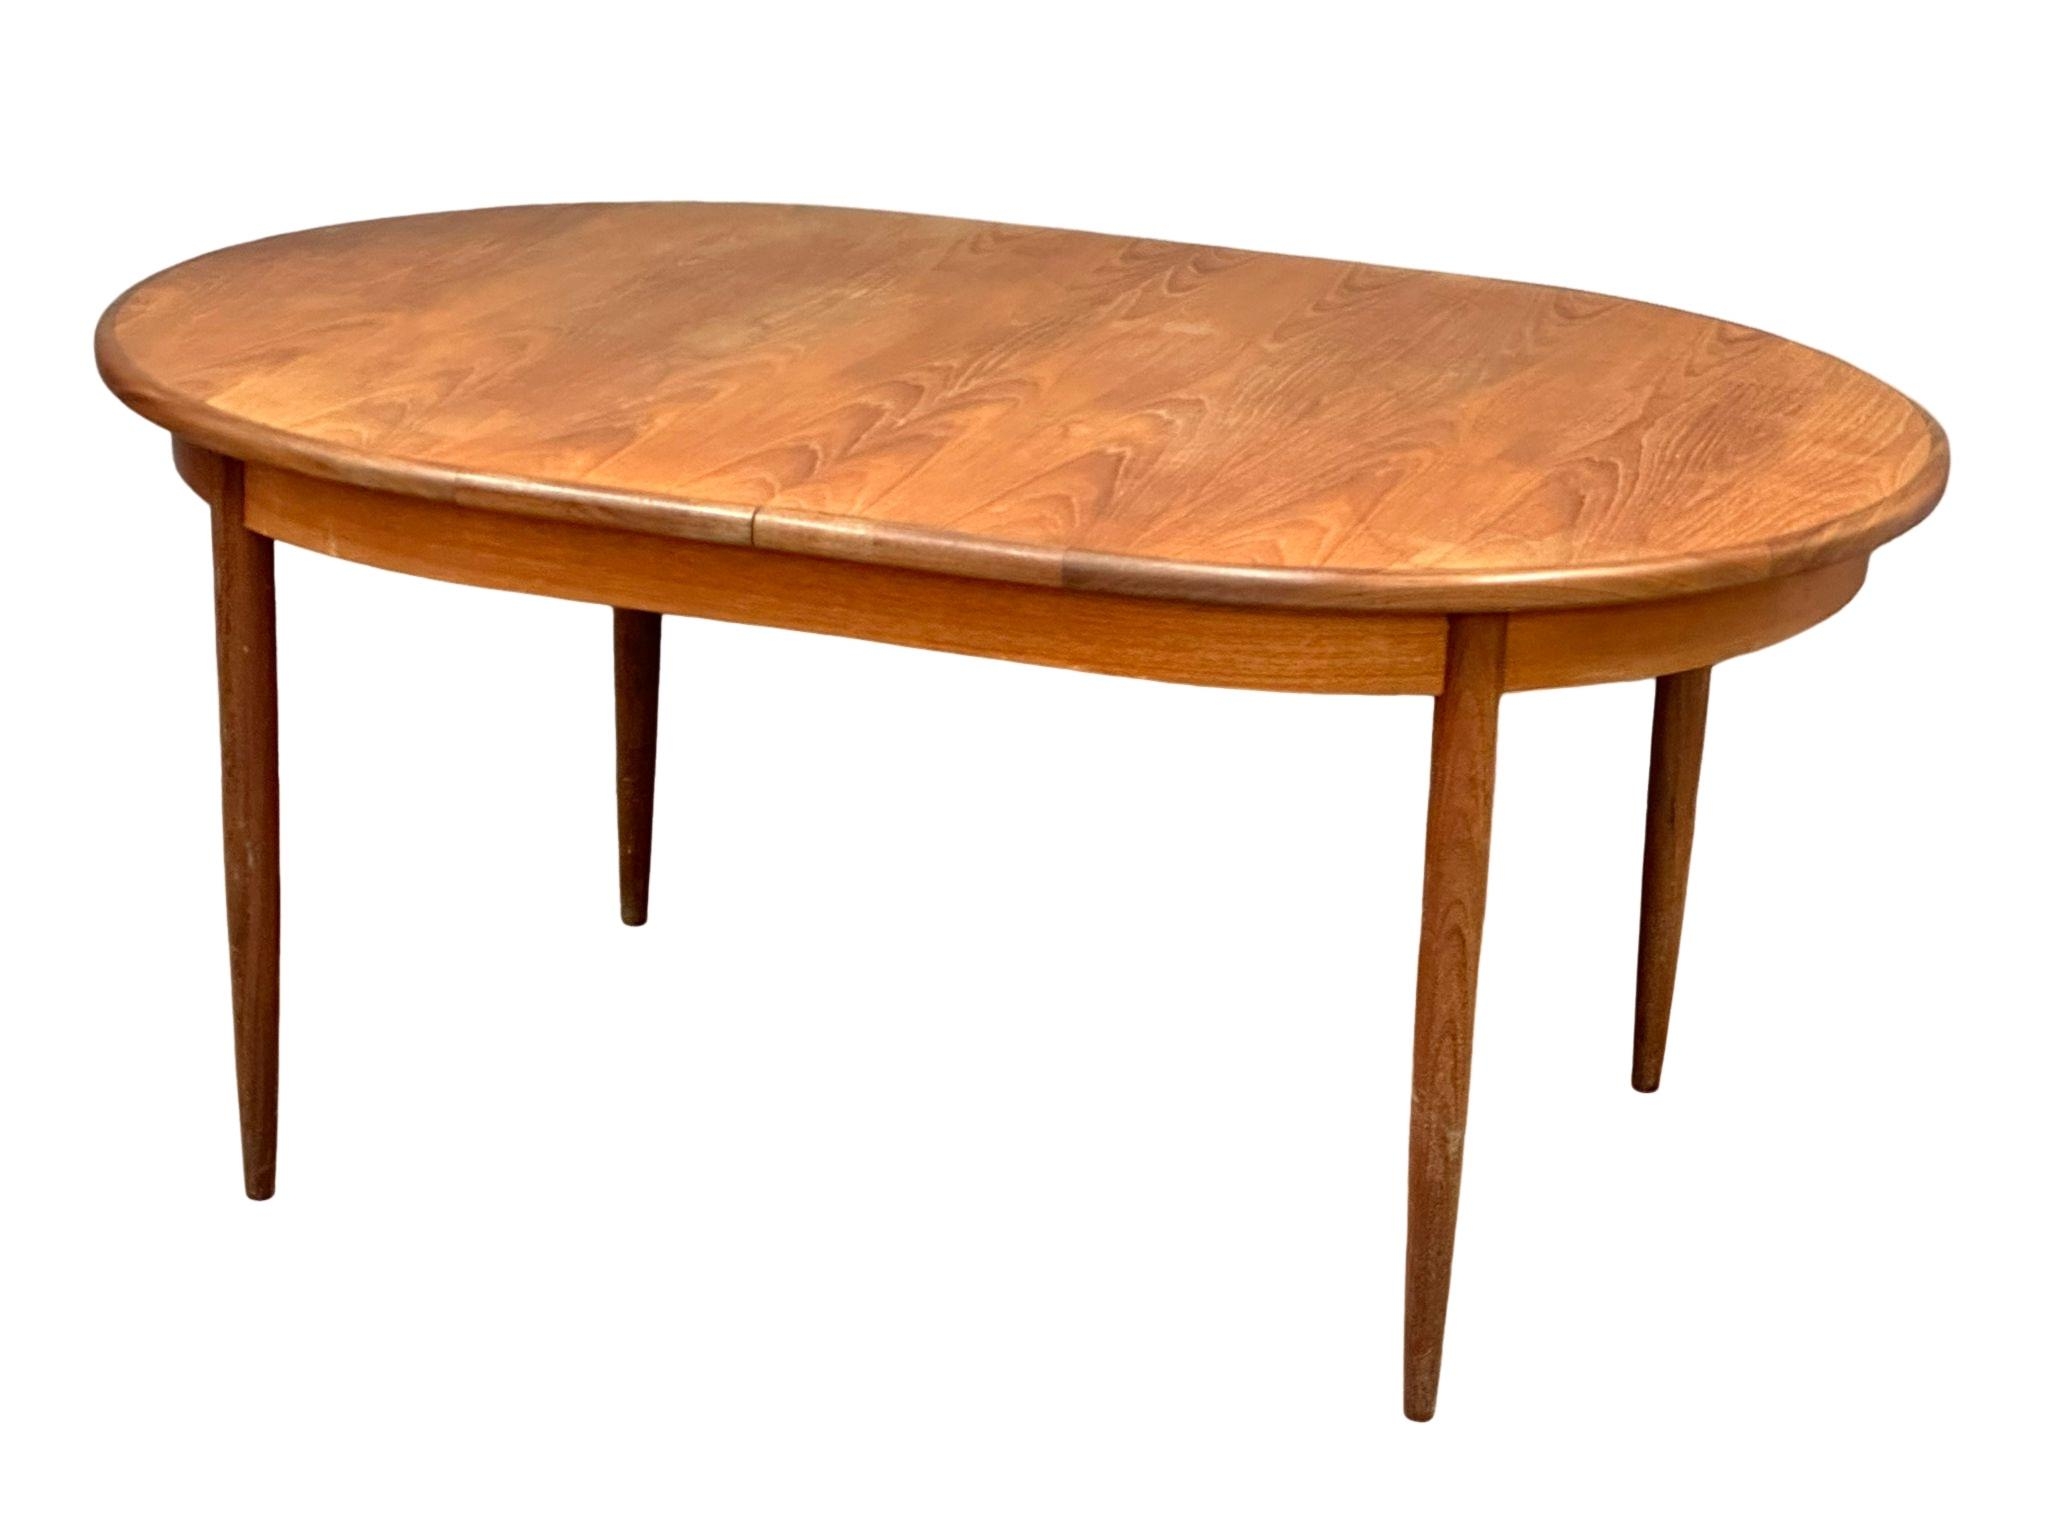 A G-Plan "Fresco" Mid Century teak extending dining table and 6 chairs designed by Victor Wilkins. - Image 3 of 12